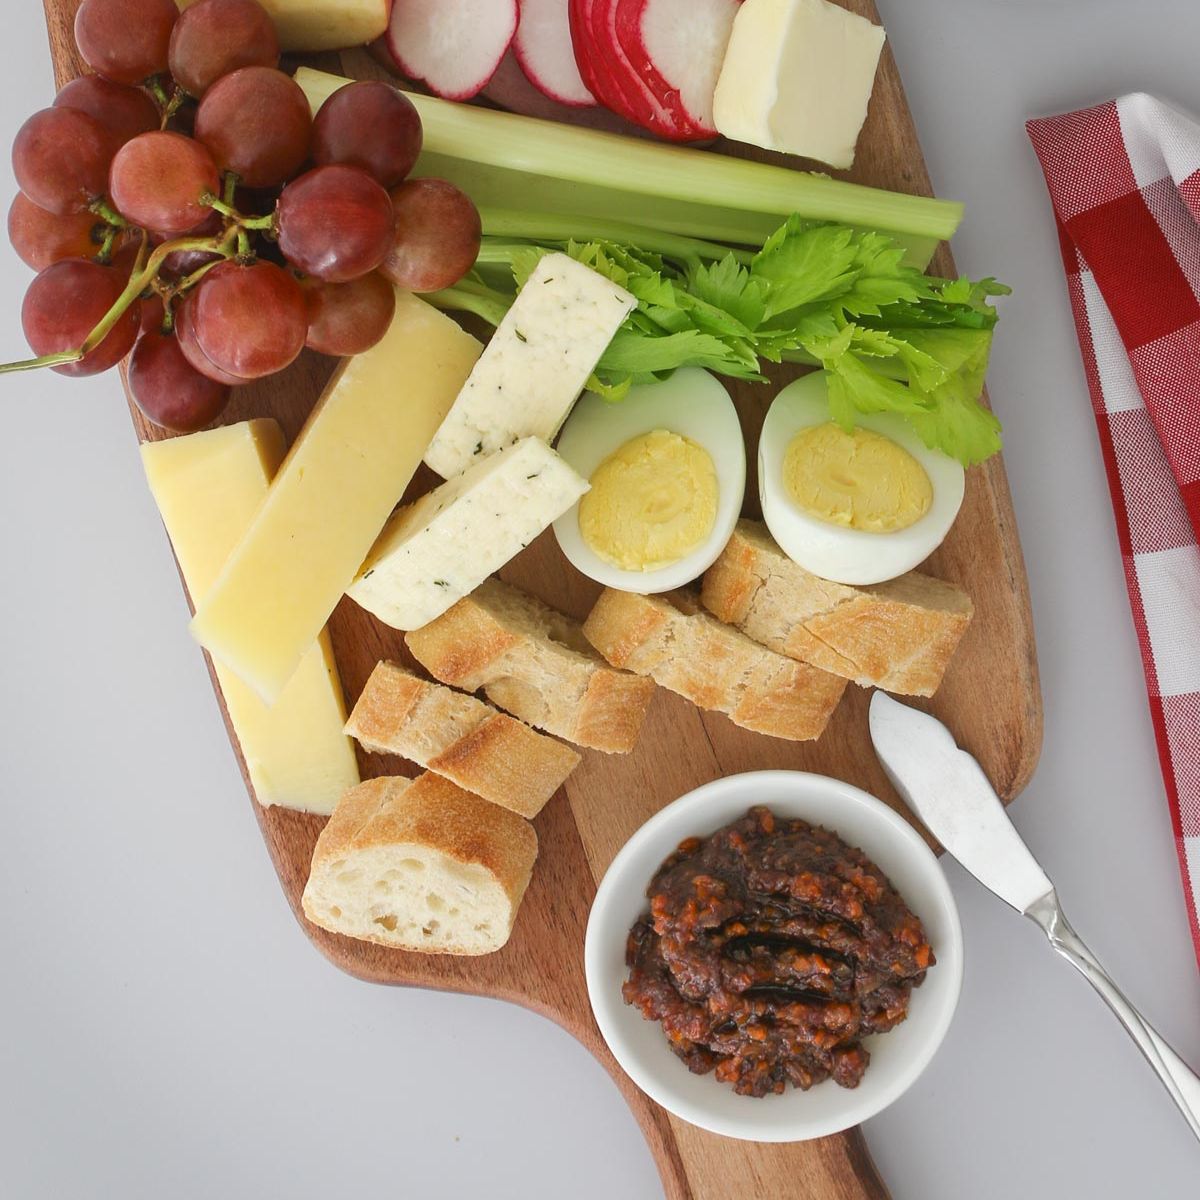 close up of ploughman's lunch on a wooden board with a red checked cloth.